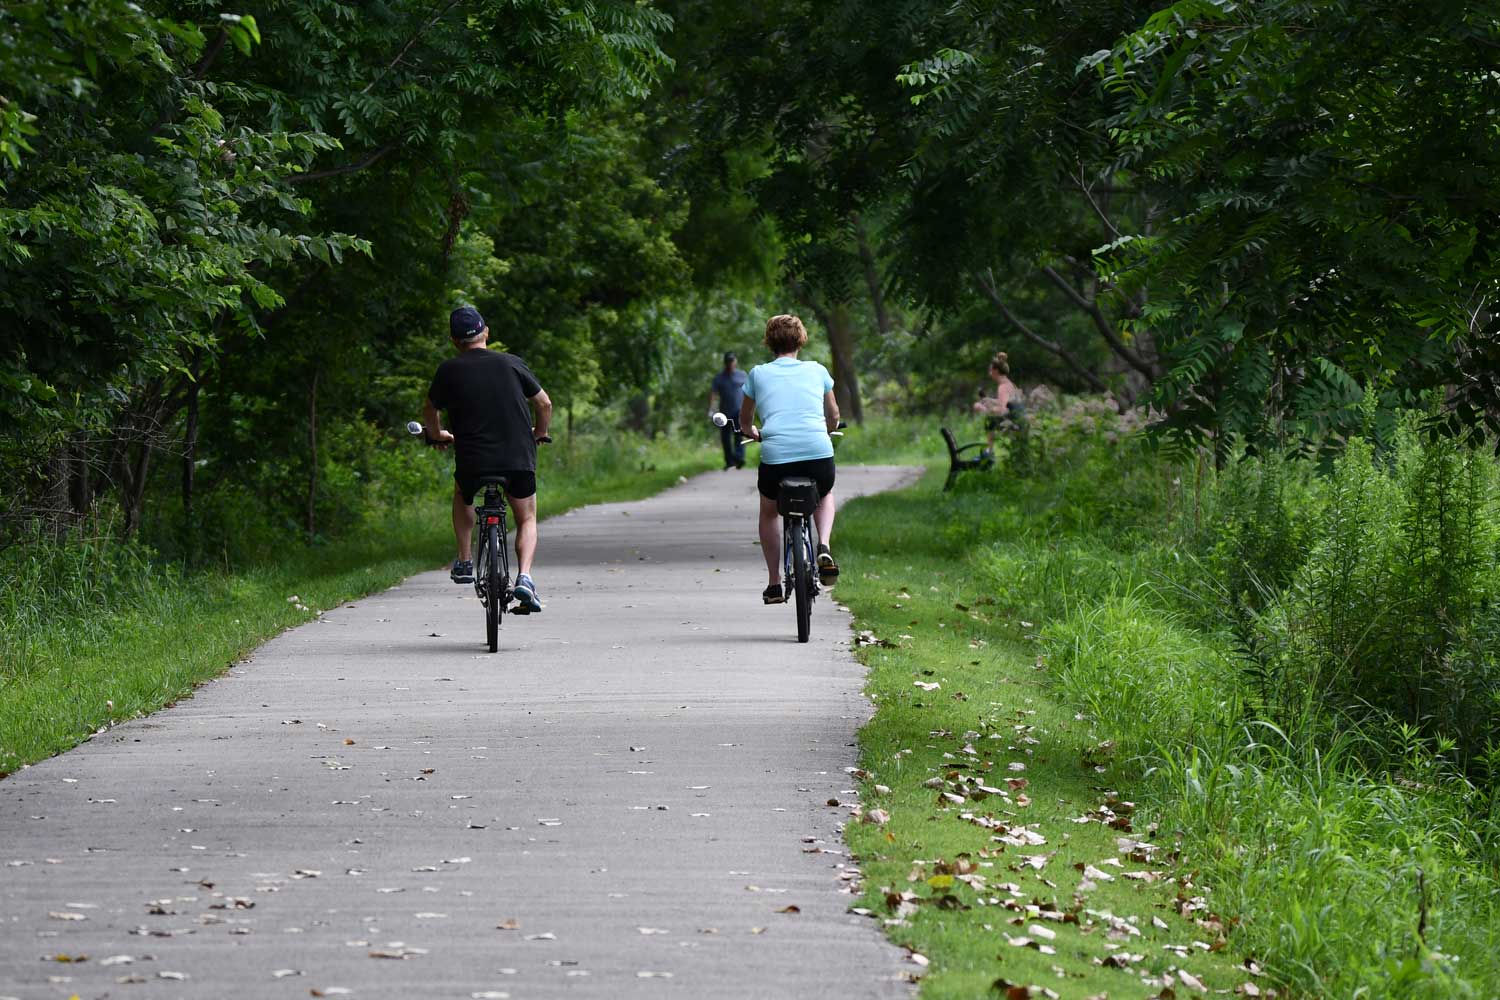 Two people riding down a paved trail lined by trees and grasses.